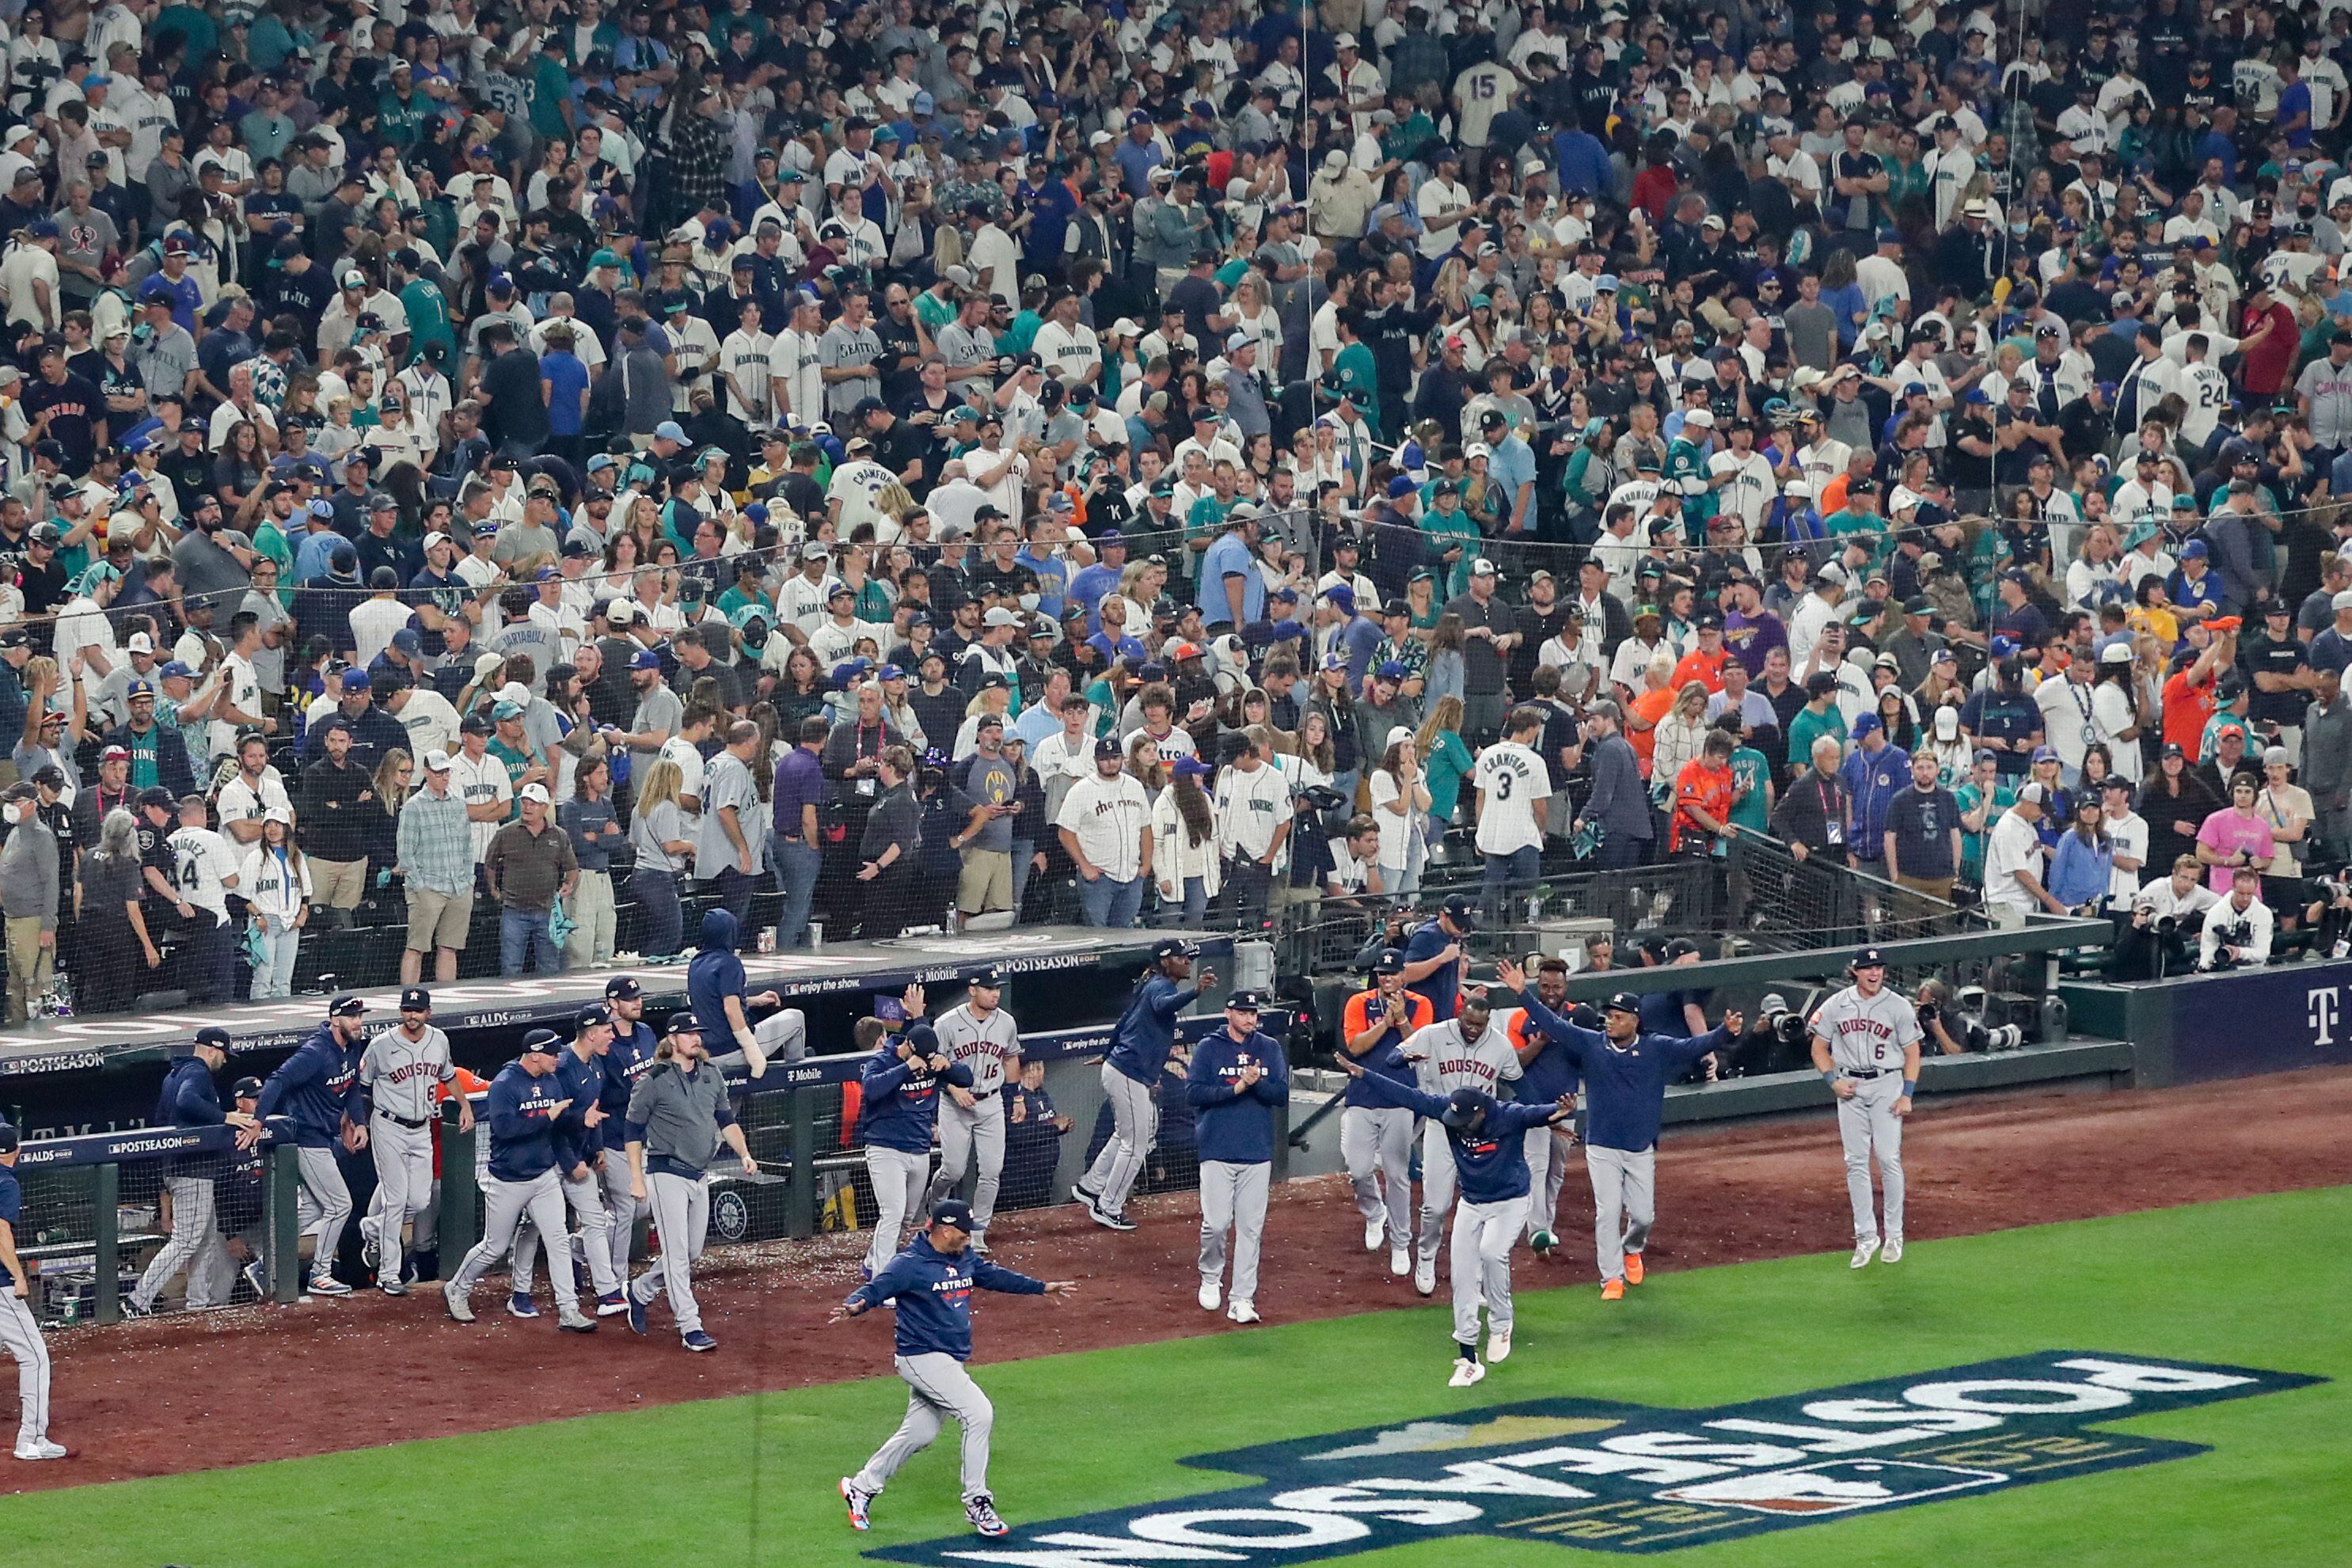 Astros outlast Mariners in 18-inning marathon, advance to ALCS